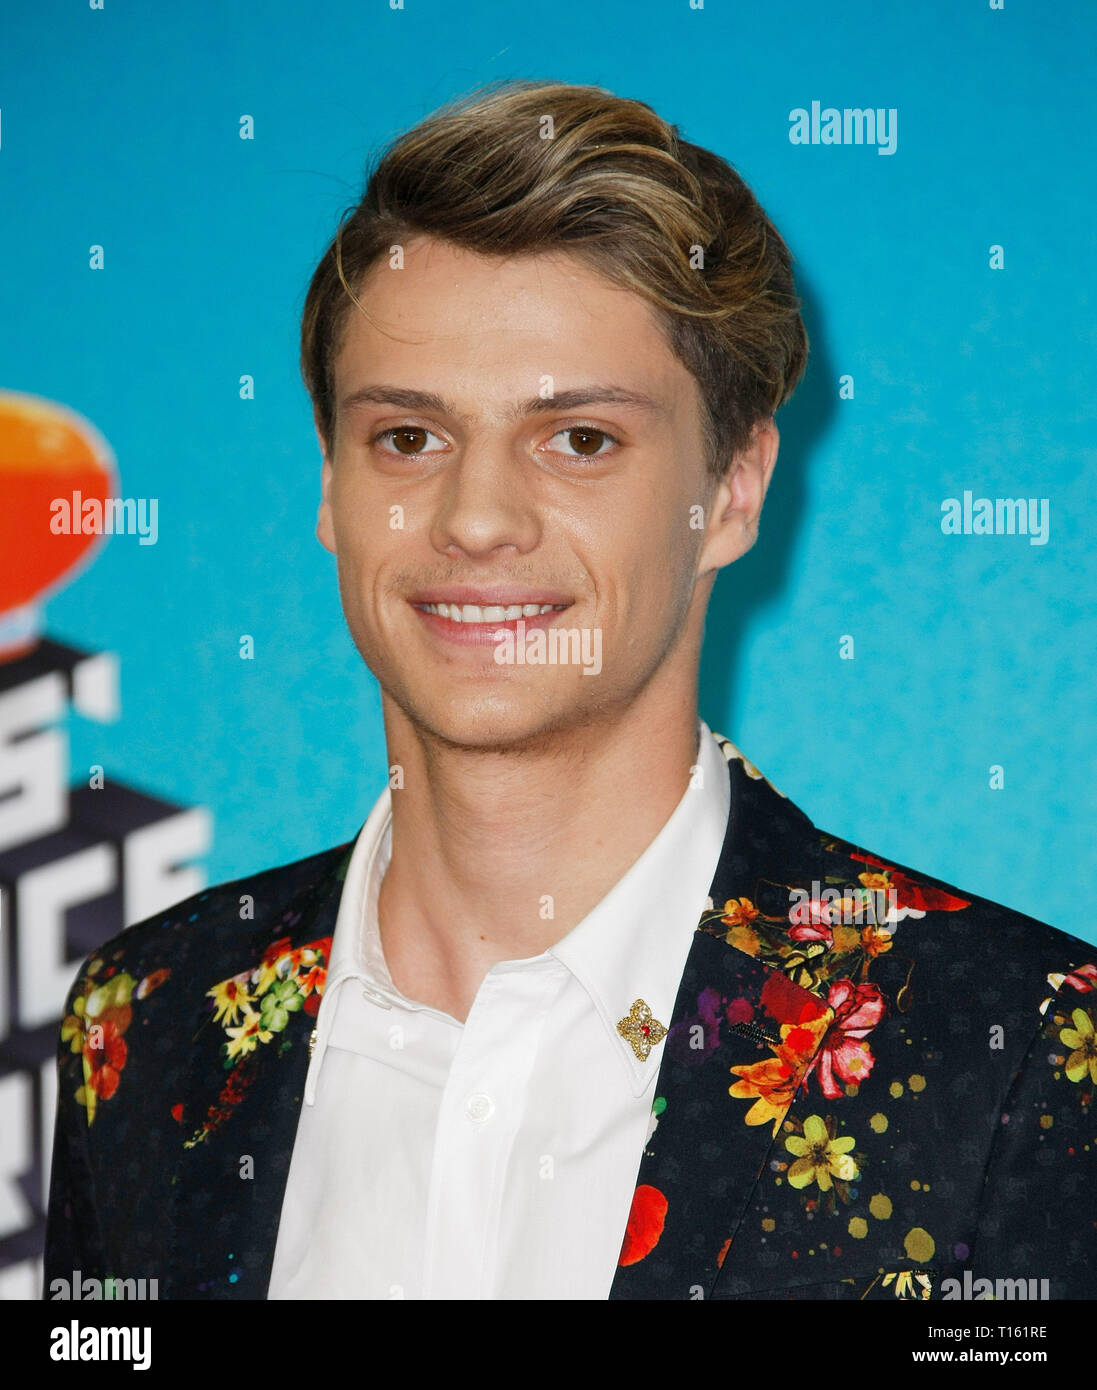 Los Angeles, USA. 23rd Mar, 2019. Jace Norman attends Nickelodeon's 2019 Kids' Choice Awards at Galen Center on March 23, 2019 in Los Angeles, California. Photo: imageSPACE Credit: Imagespace/Alamy Live News Stock Photo